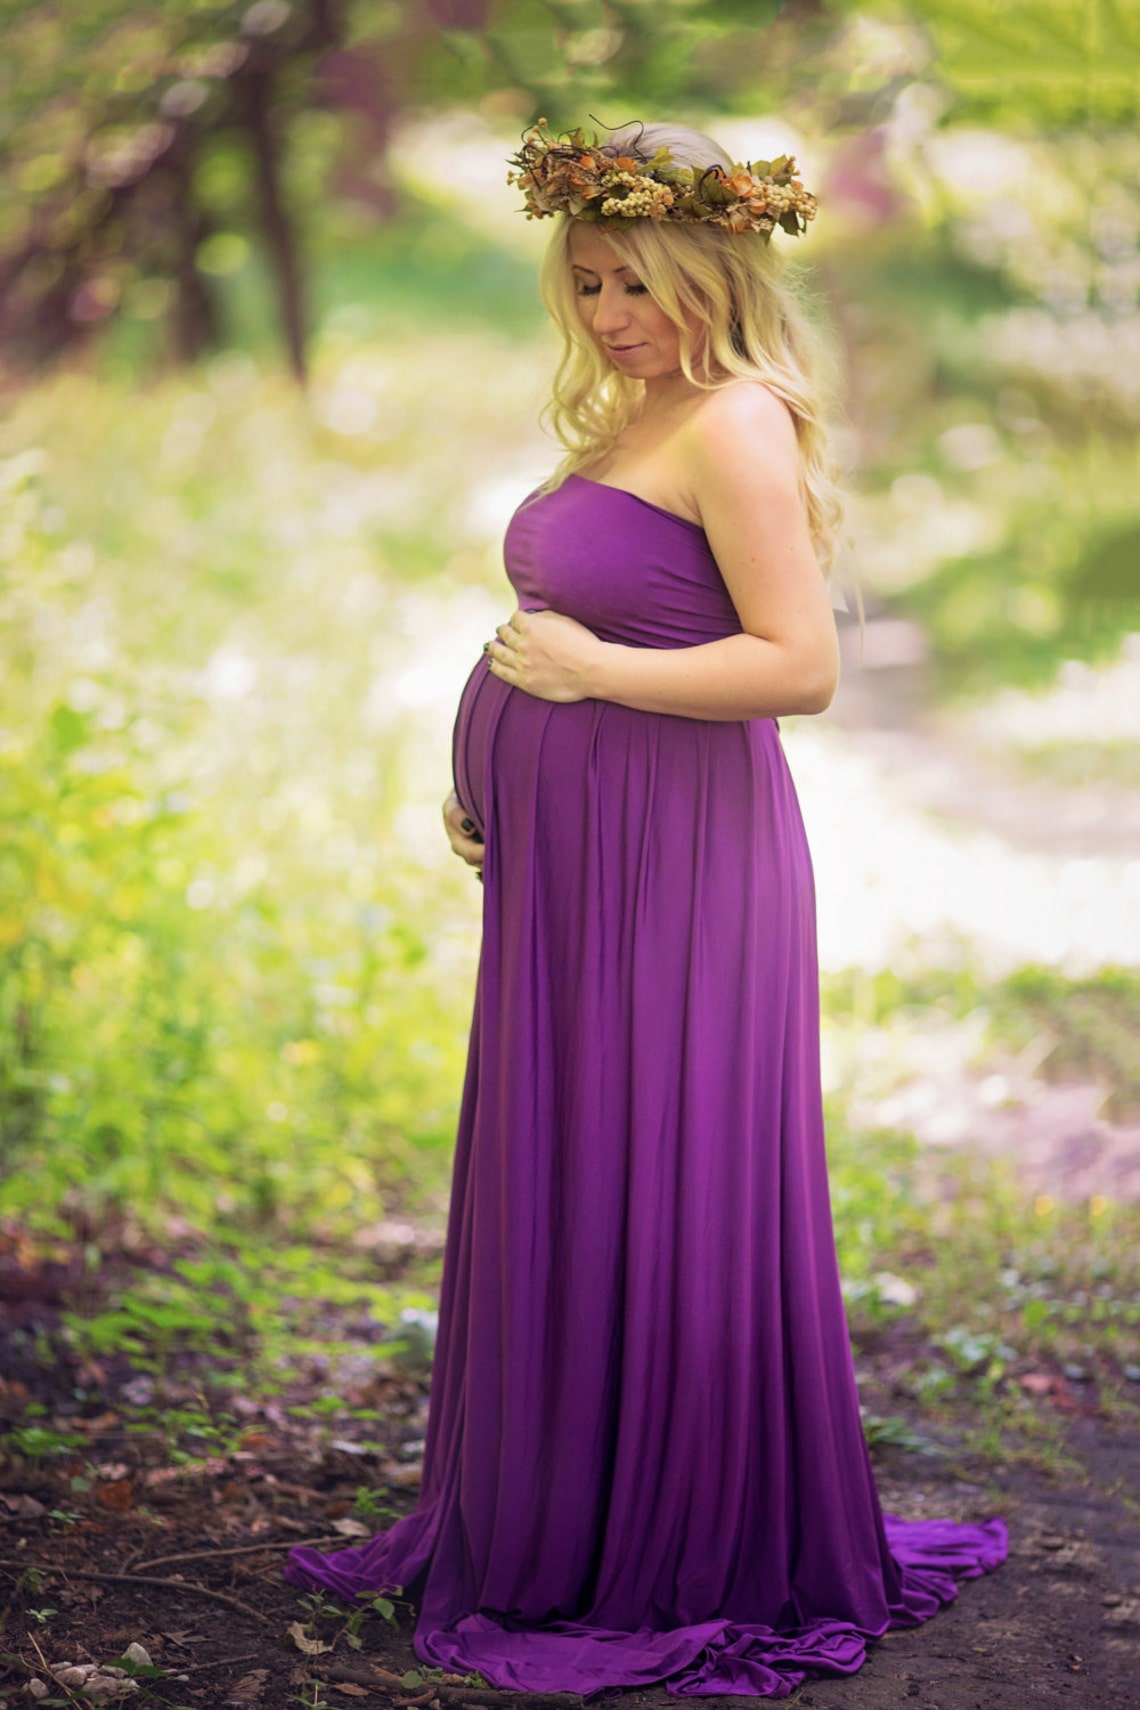 Maternity Dress for Bay Shower-maternity Gown for Photo | Etsy